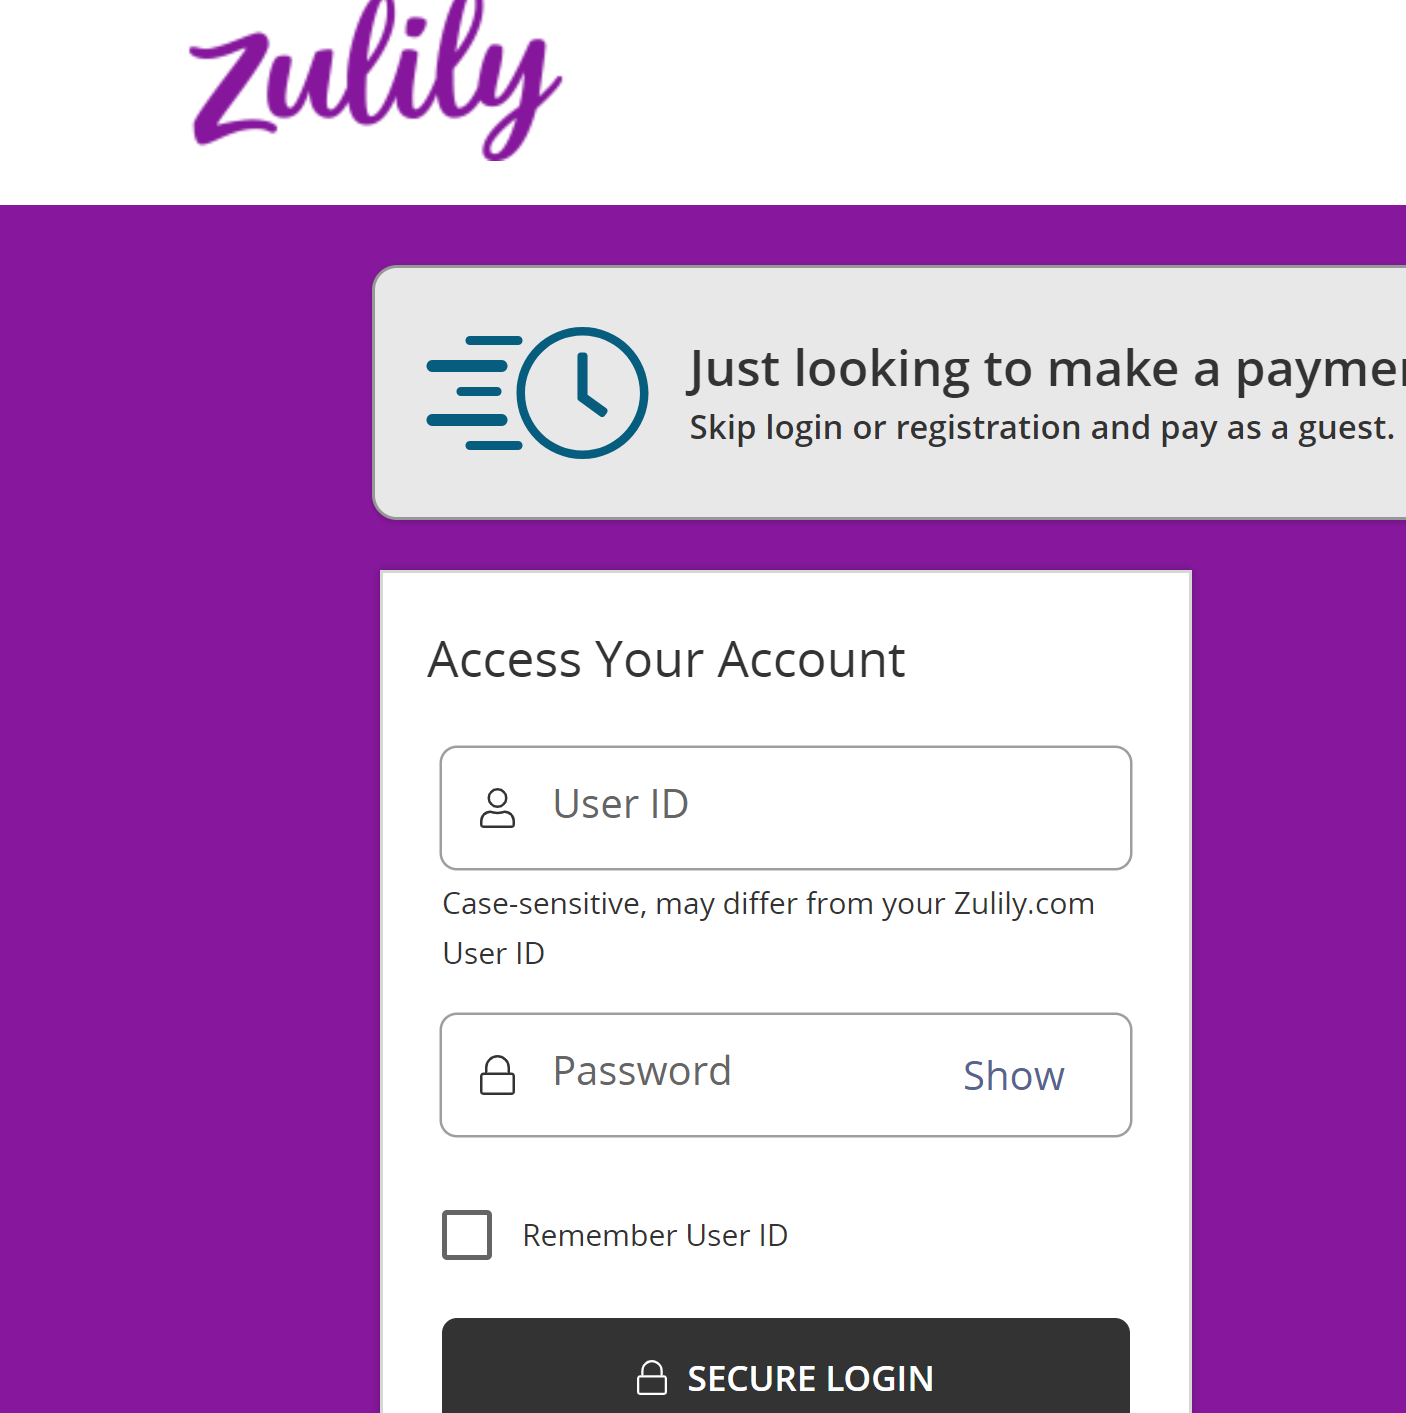 Zulily Credit Card Login Steps  -  Zulily Credit Card Payment Guide  | Apply